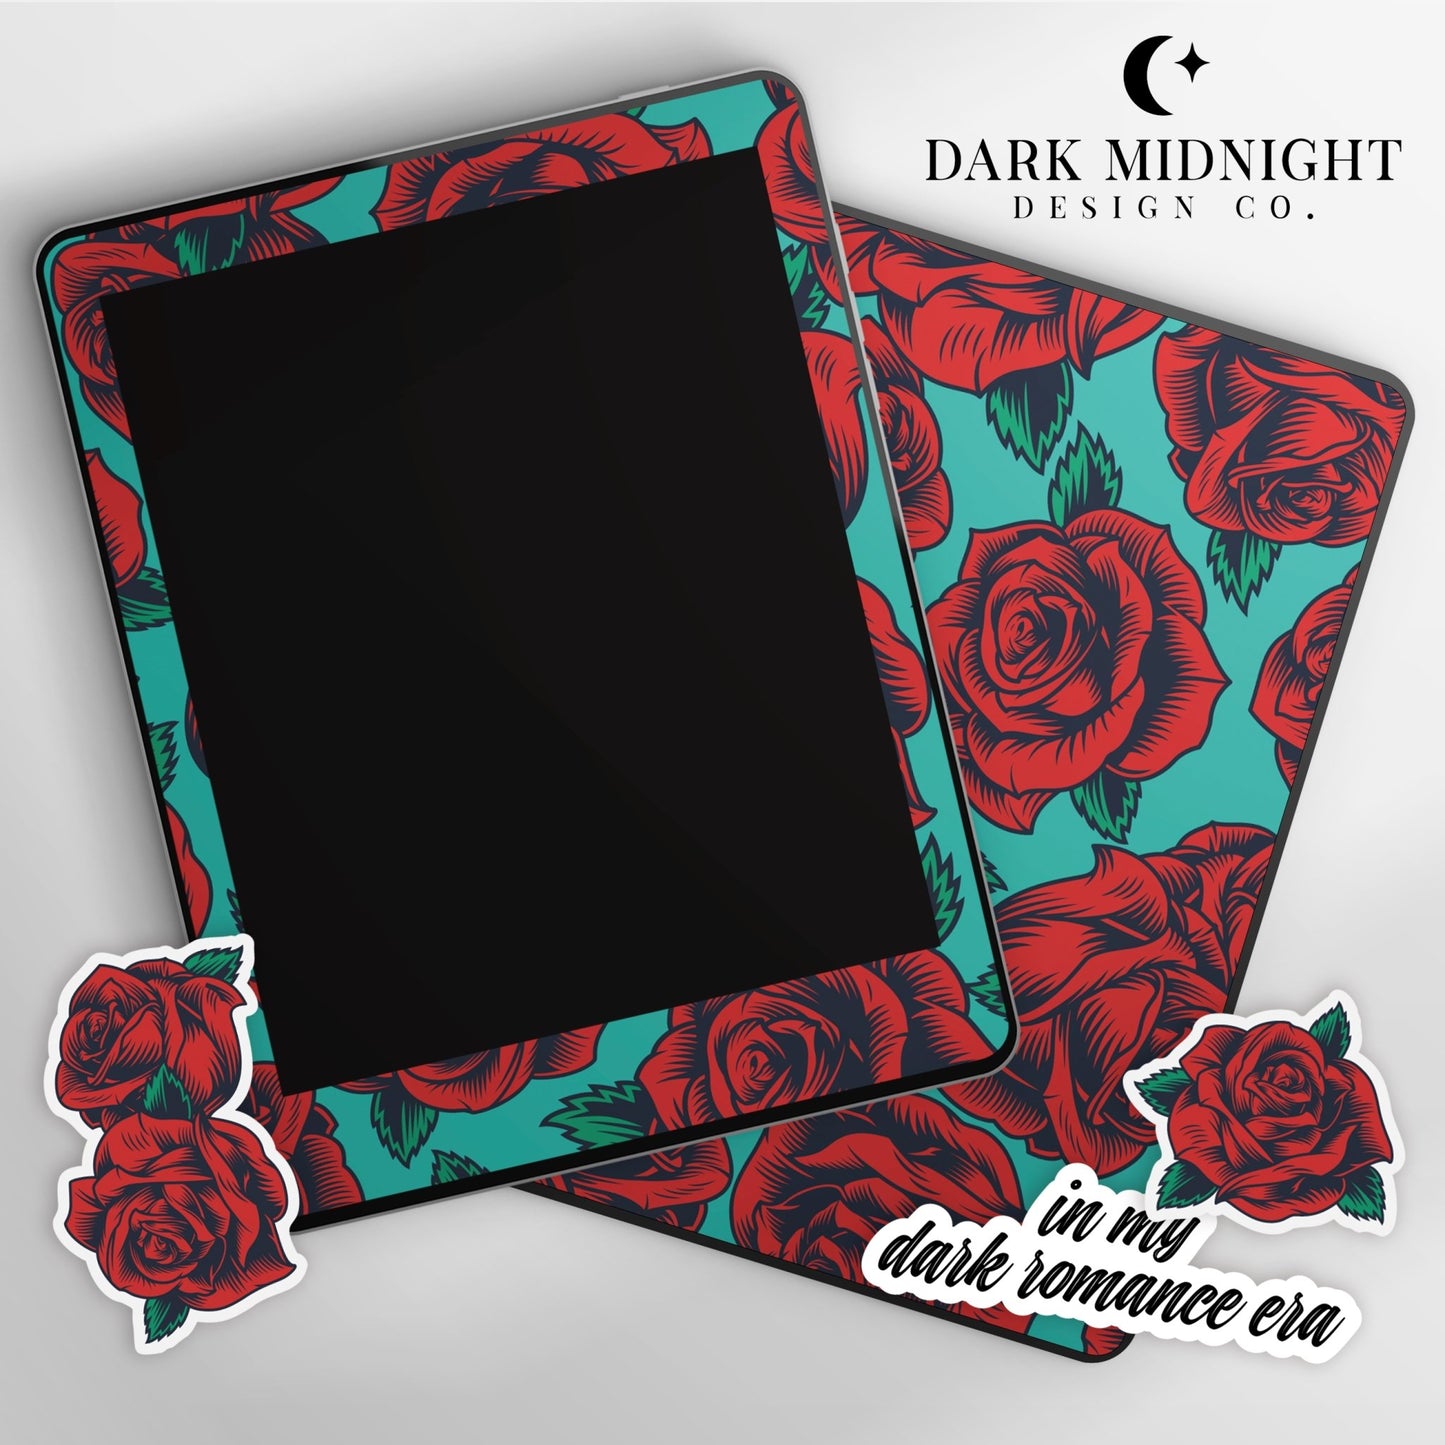 Vintage Rose Teal and Red Kindle Paperwhite Vinyl Wrap - Dark Midnight Design Co